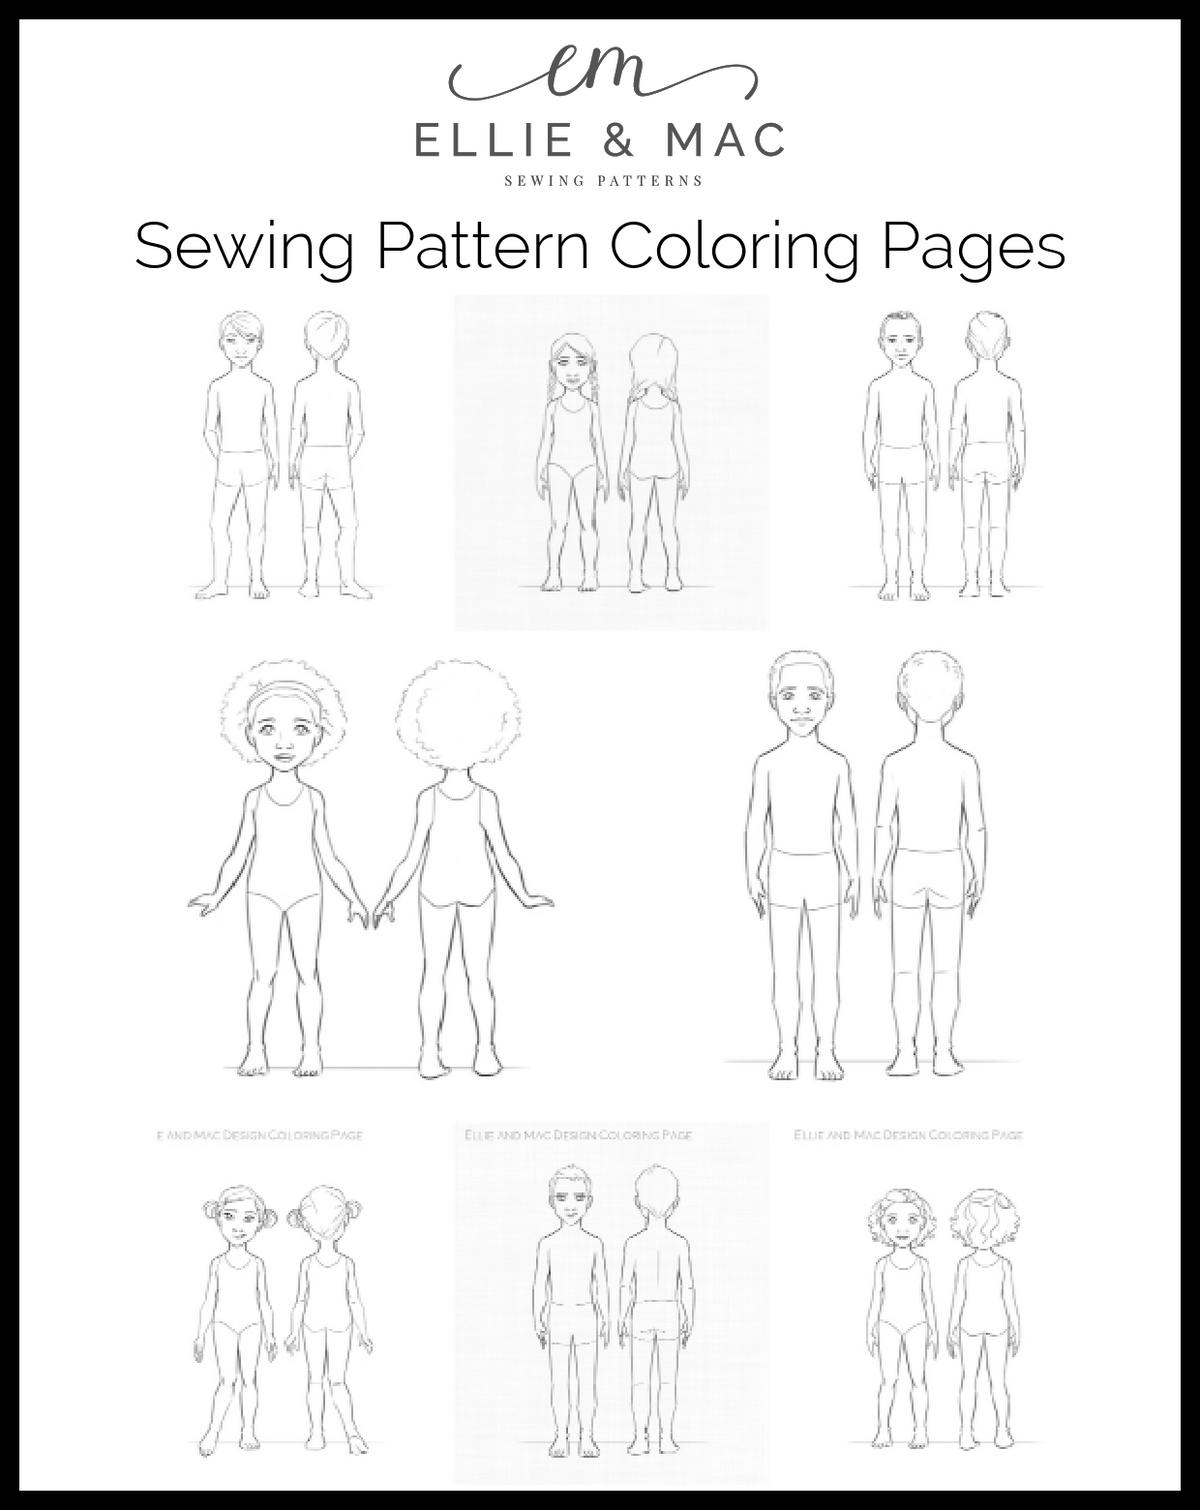 Sewing Pattern Coloring Pages